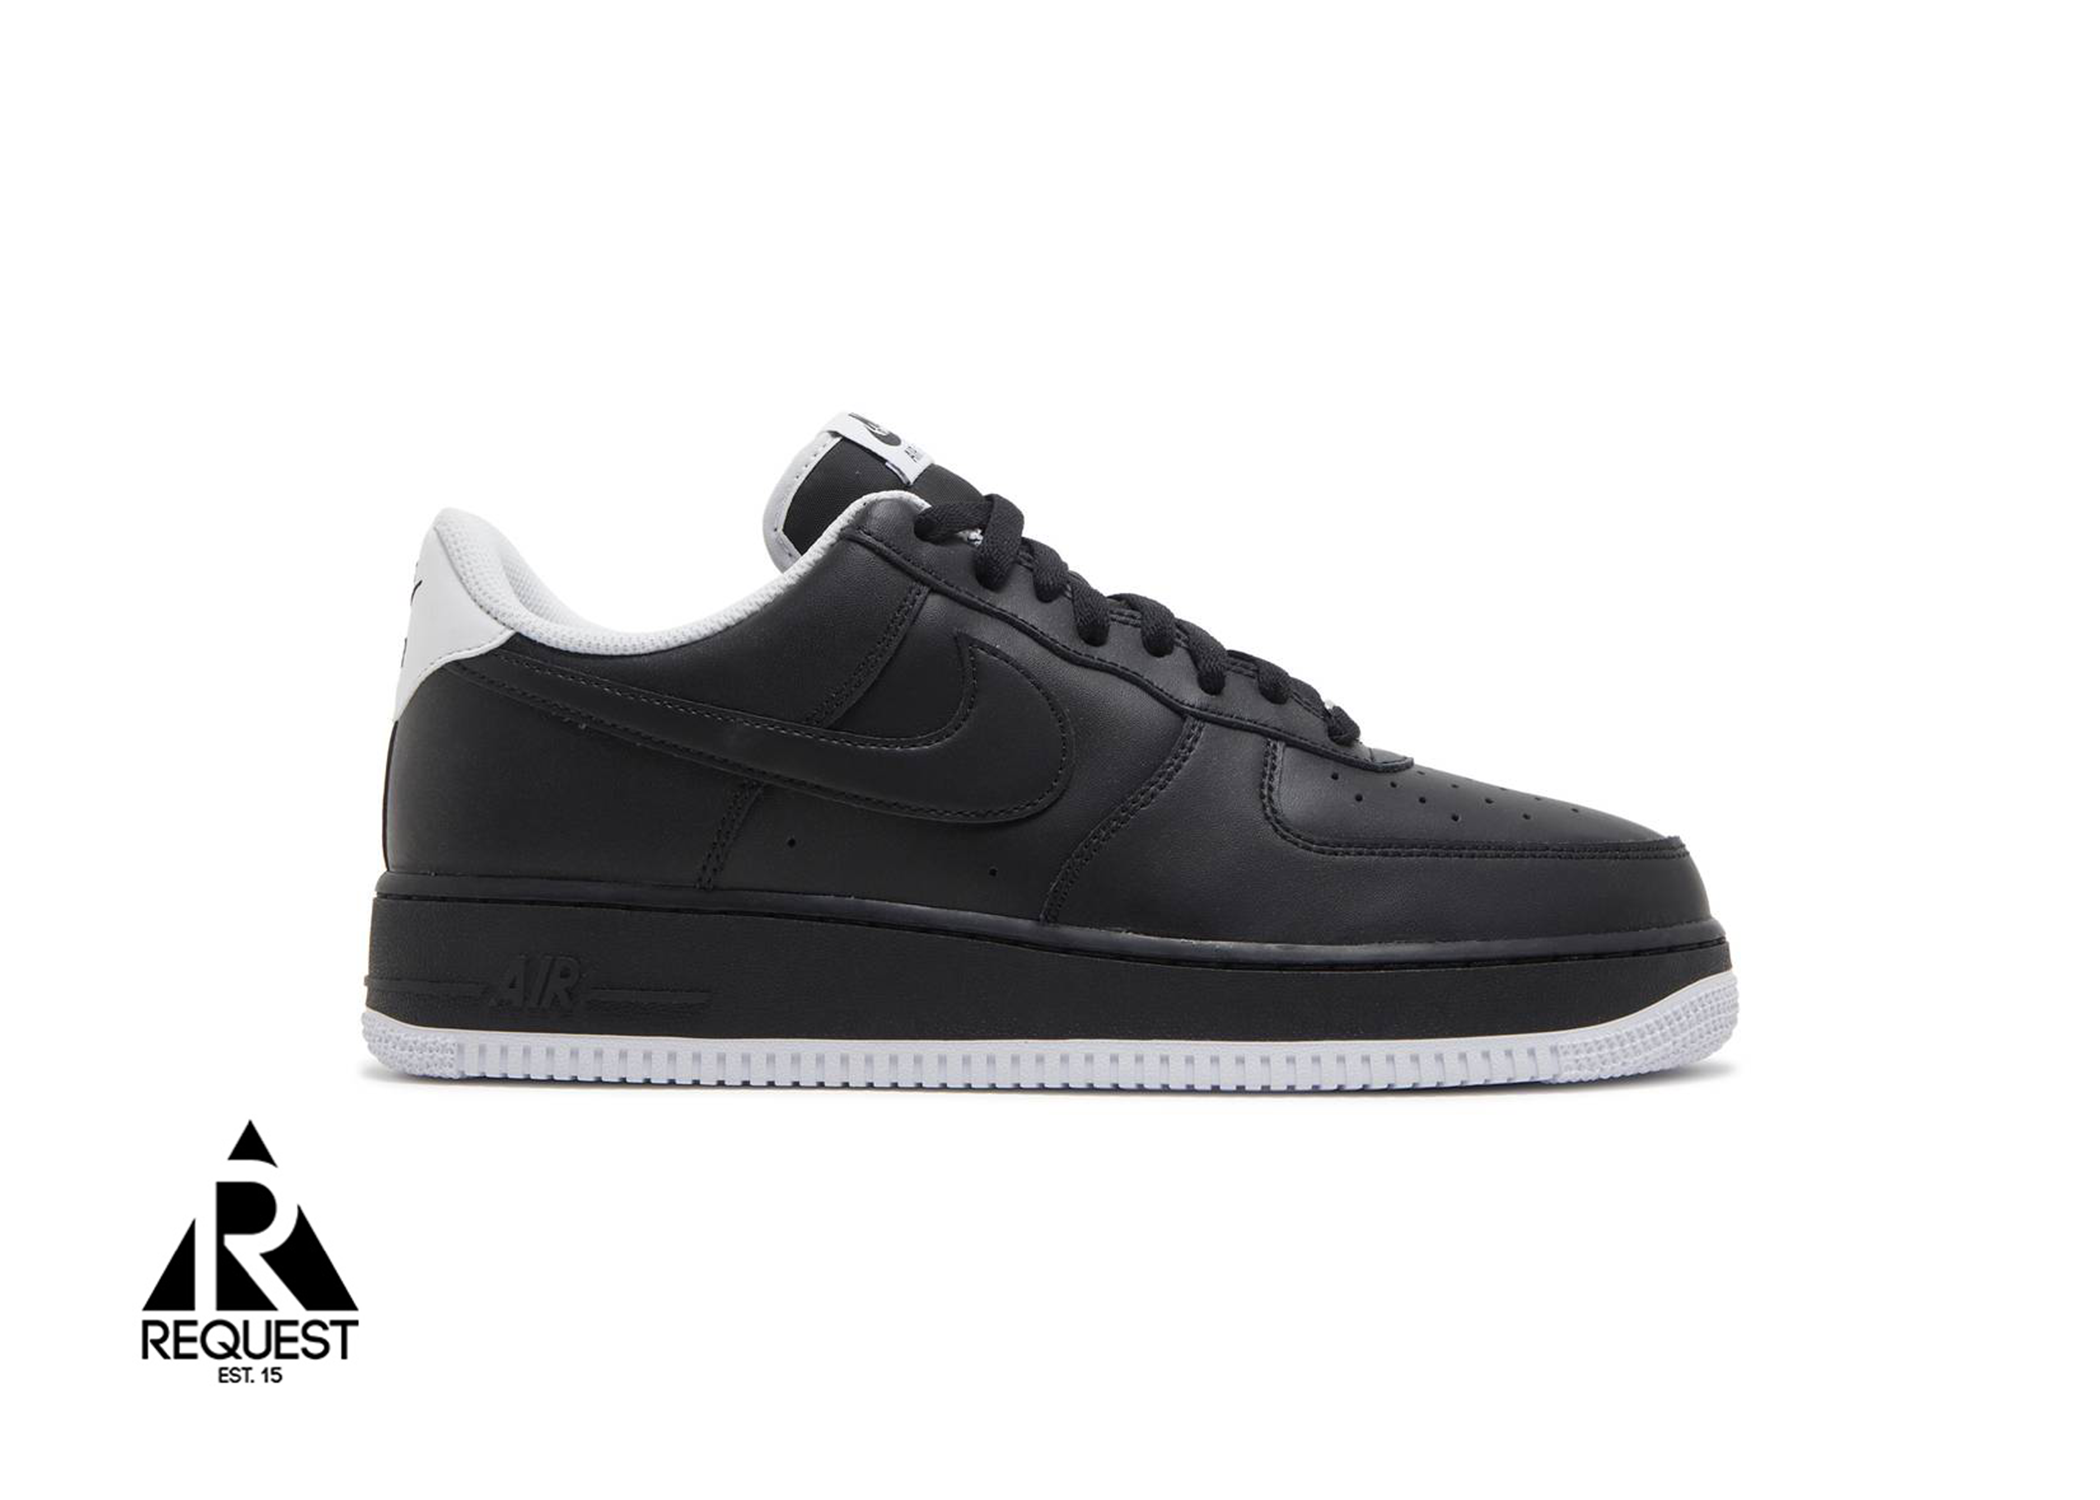 Nike Air Force 1 Low '07 "Black White Sole"